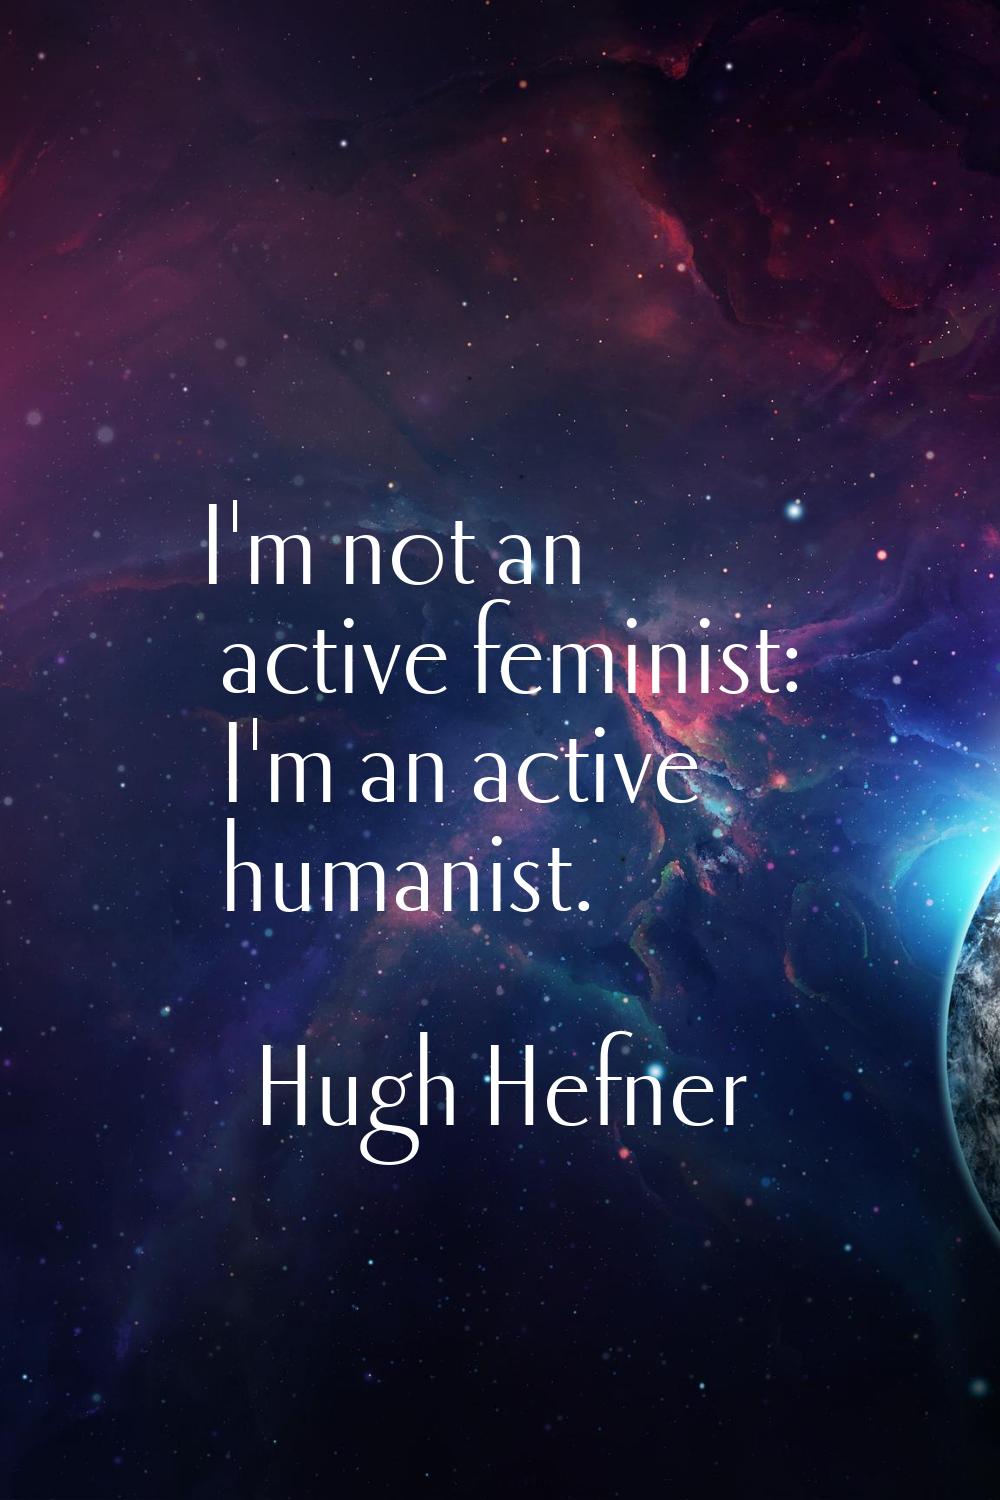 I'm not an active feminist: I'm an active humanist.